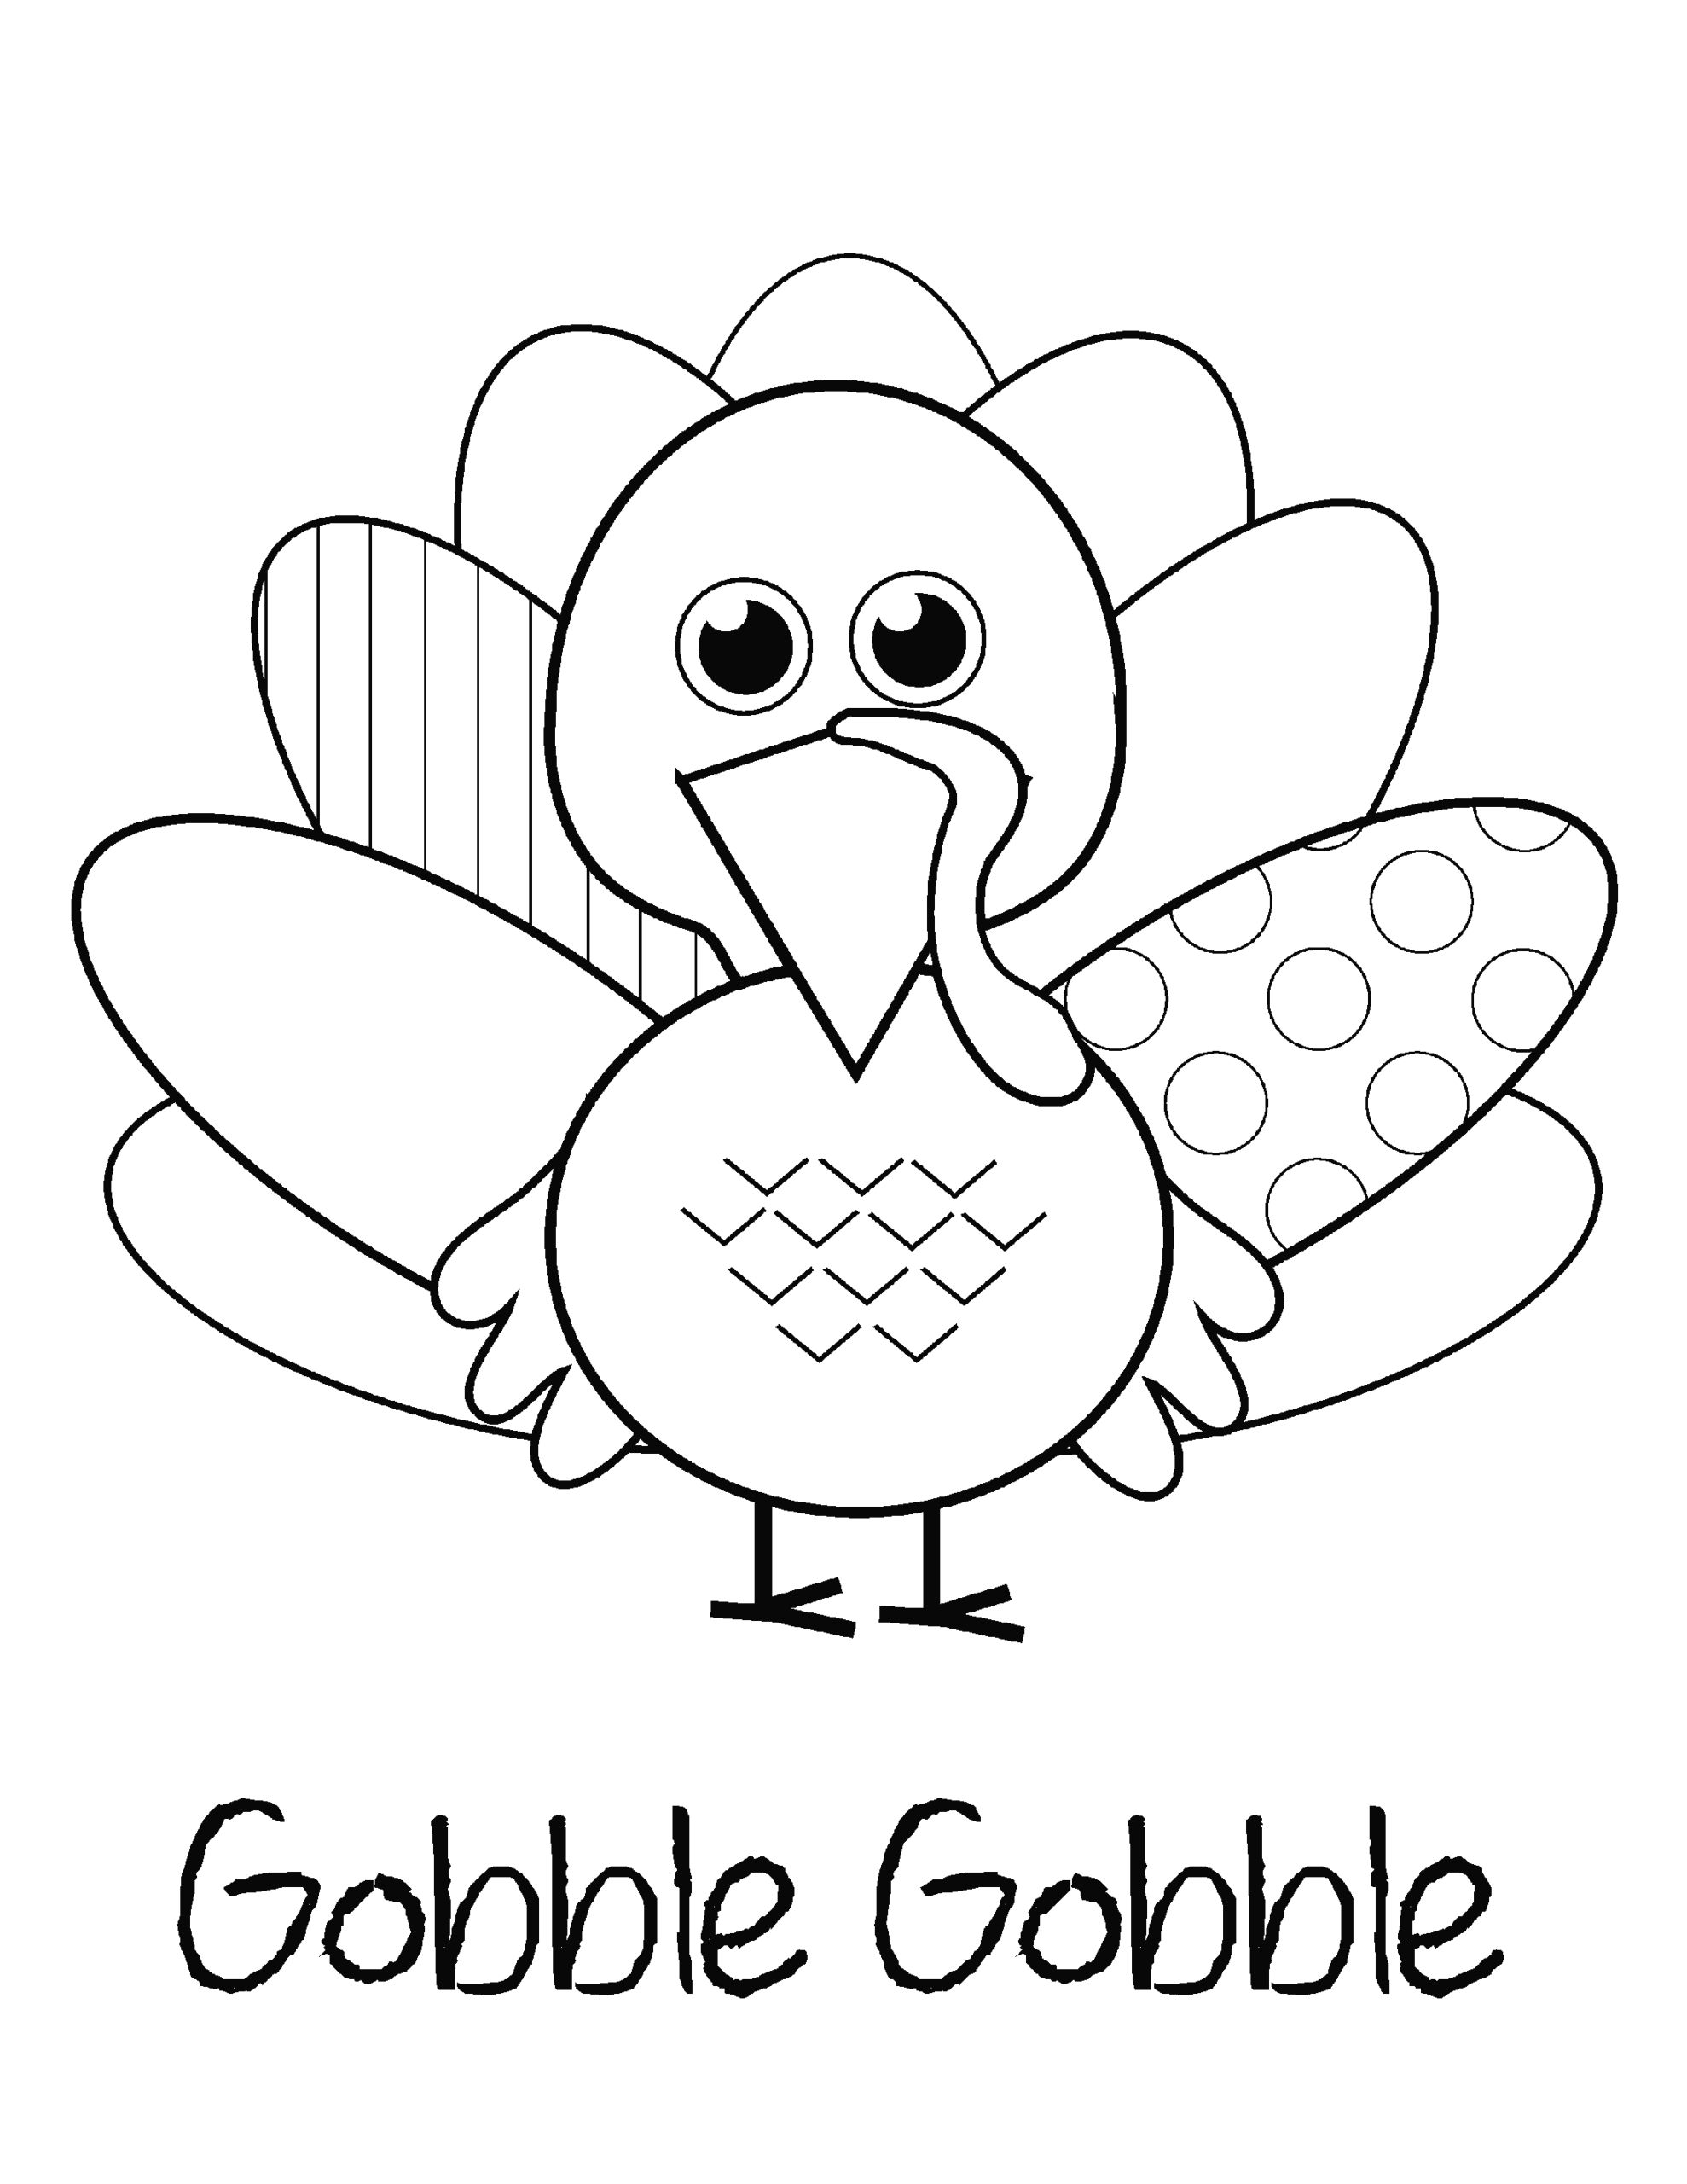 Gobble Gobble Thanksgiving Turkey Coloring Pages for Kids